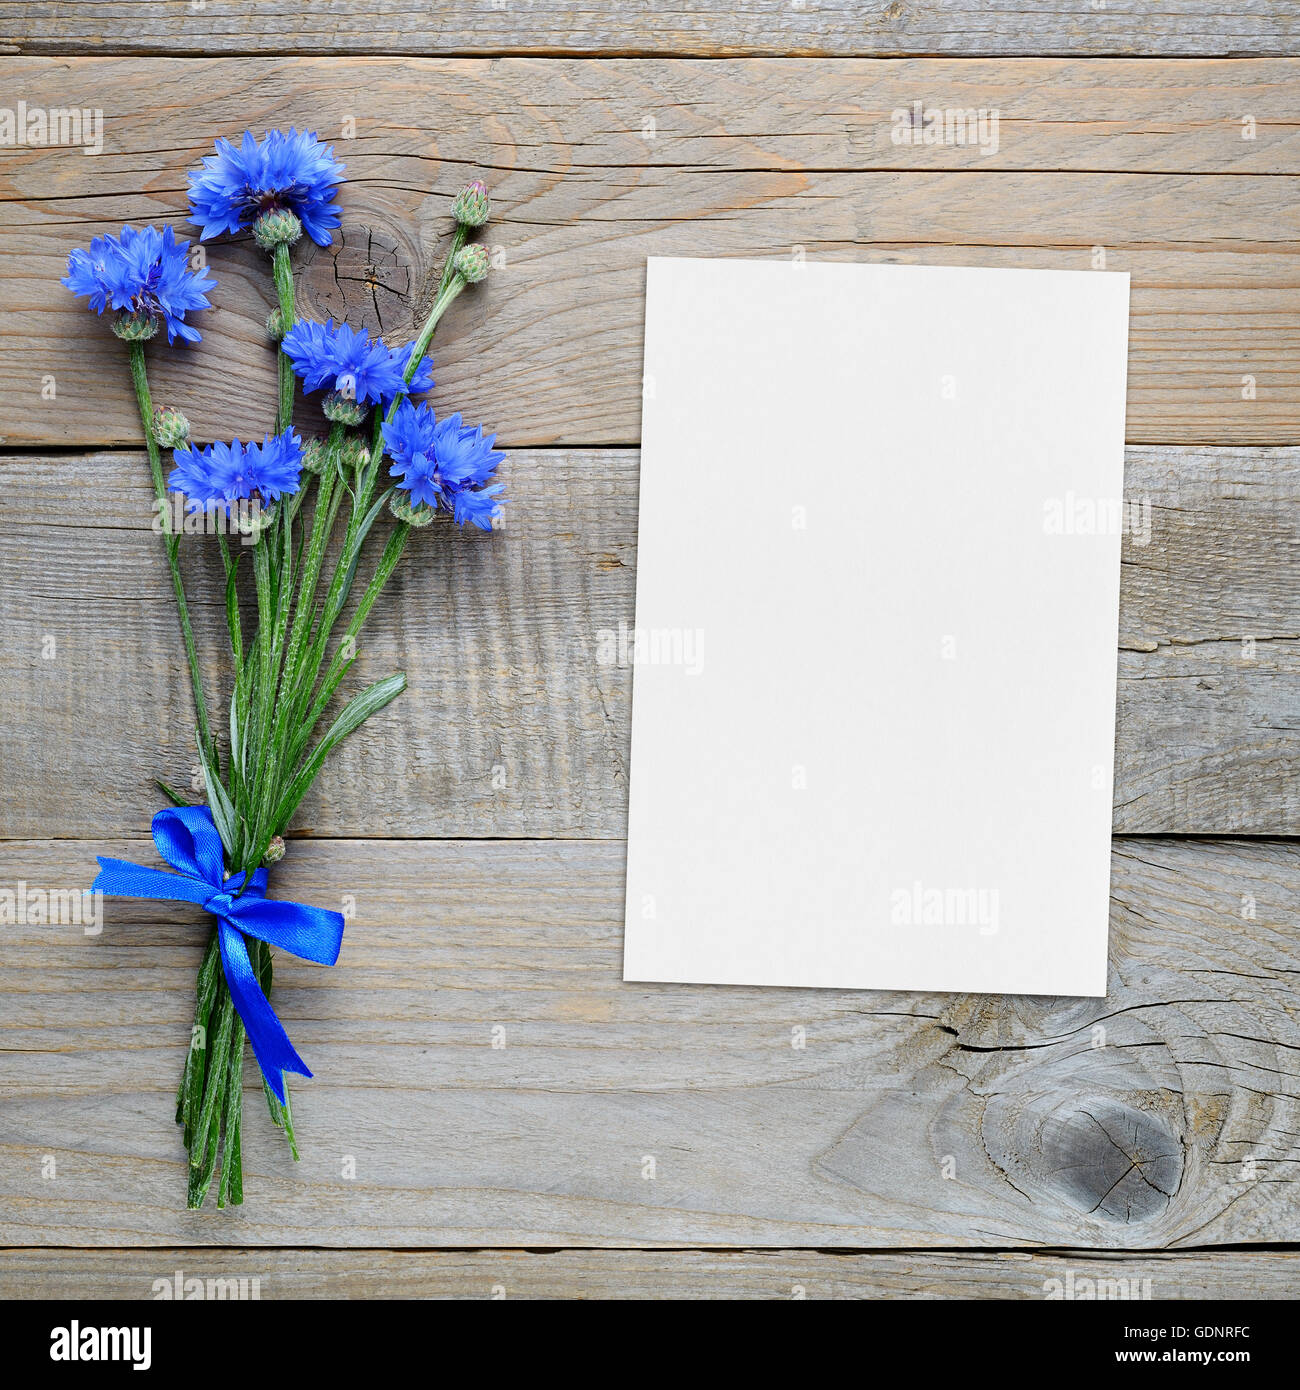 Bouquet of blue cornflowers and blank greeting card on wooden background Stock Photo